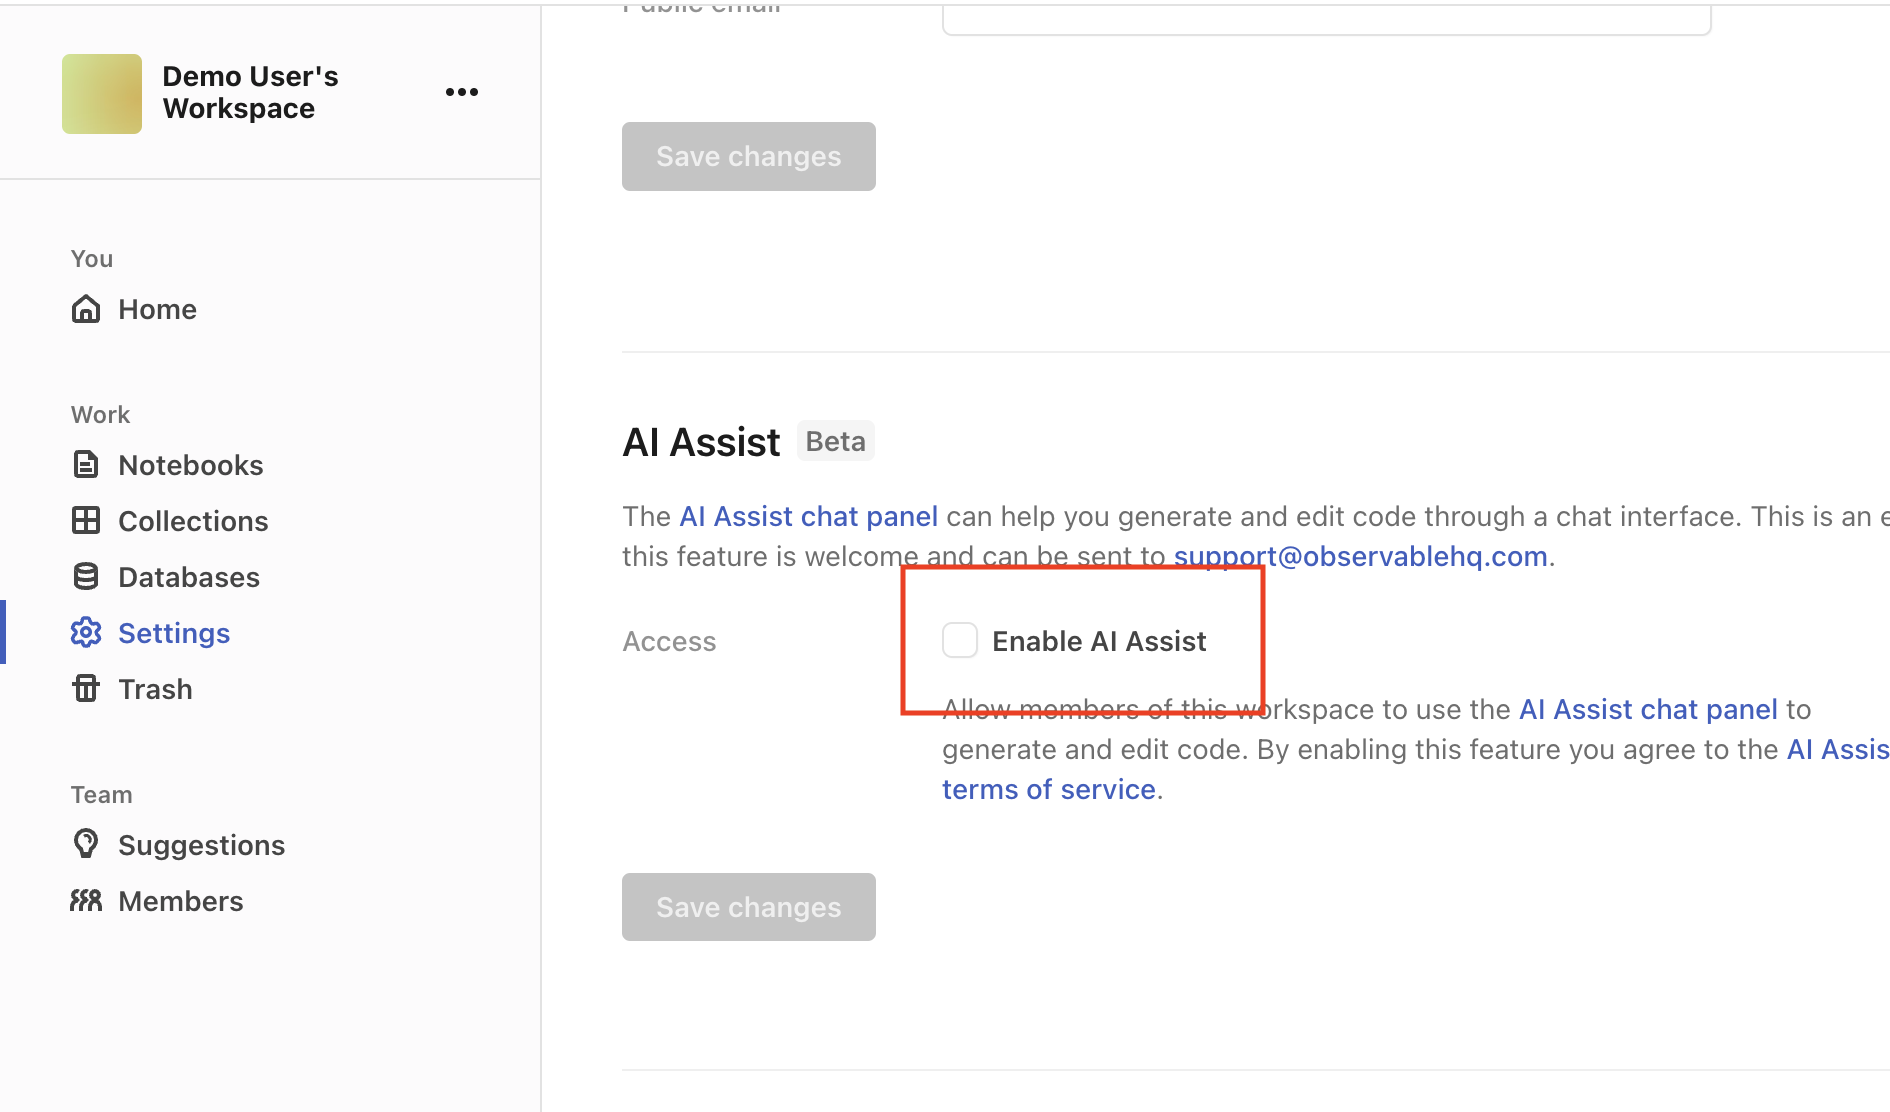 A screenshot of the AI Assist section of the Settings page with a red rectangle outline highlighting an unchecked Enable AI Assist labeled checkbox.